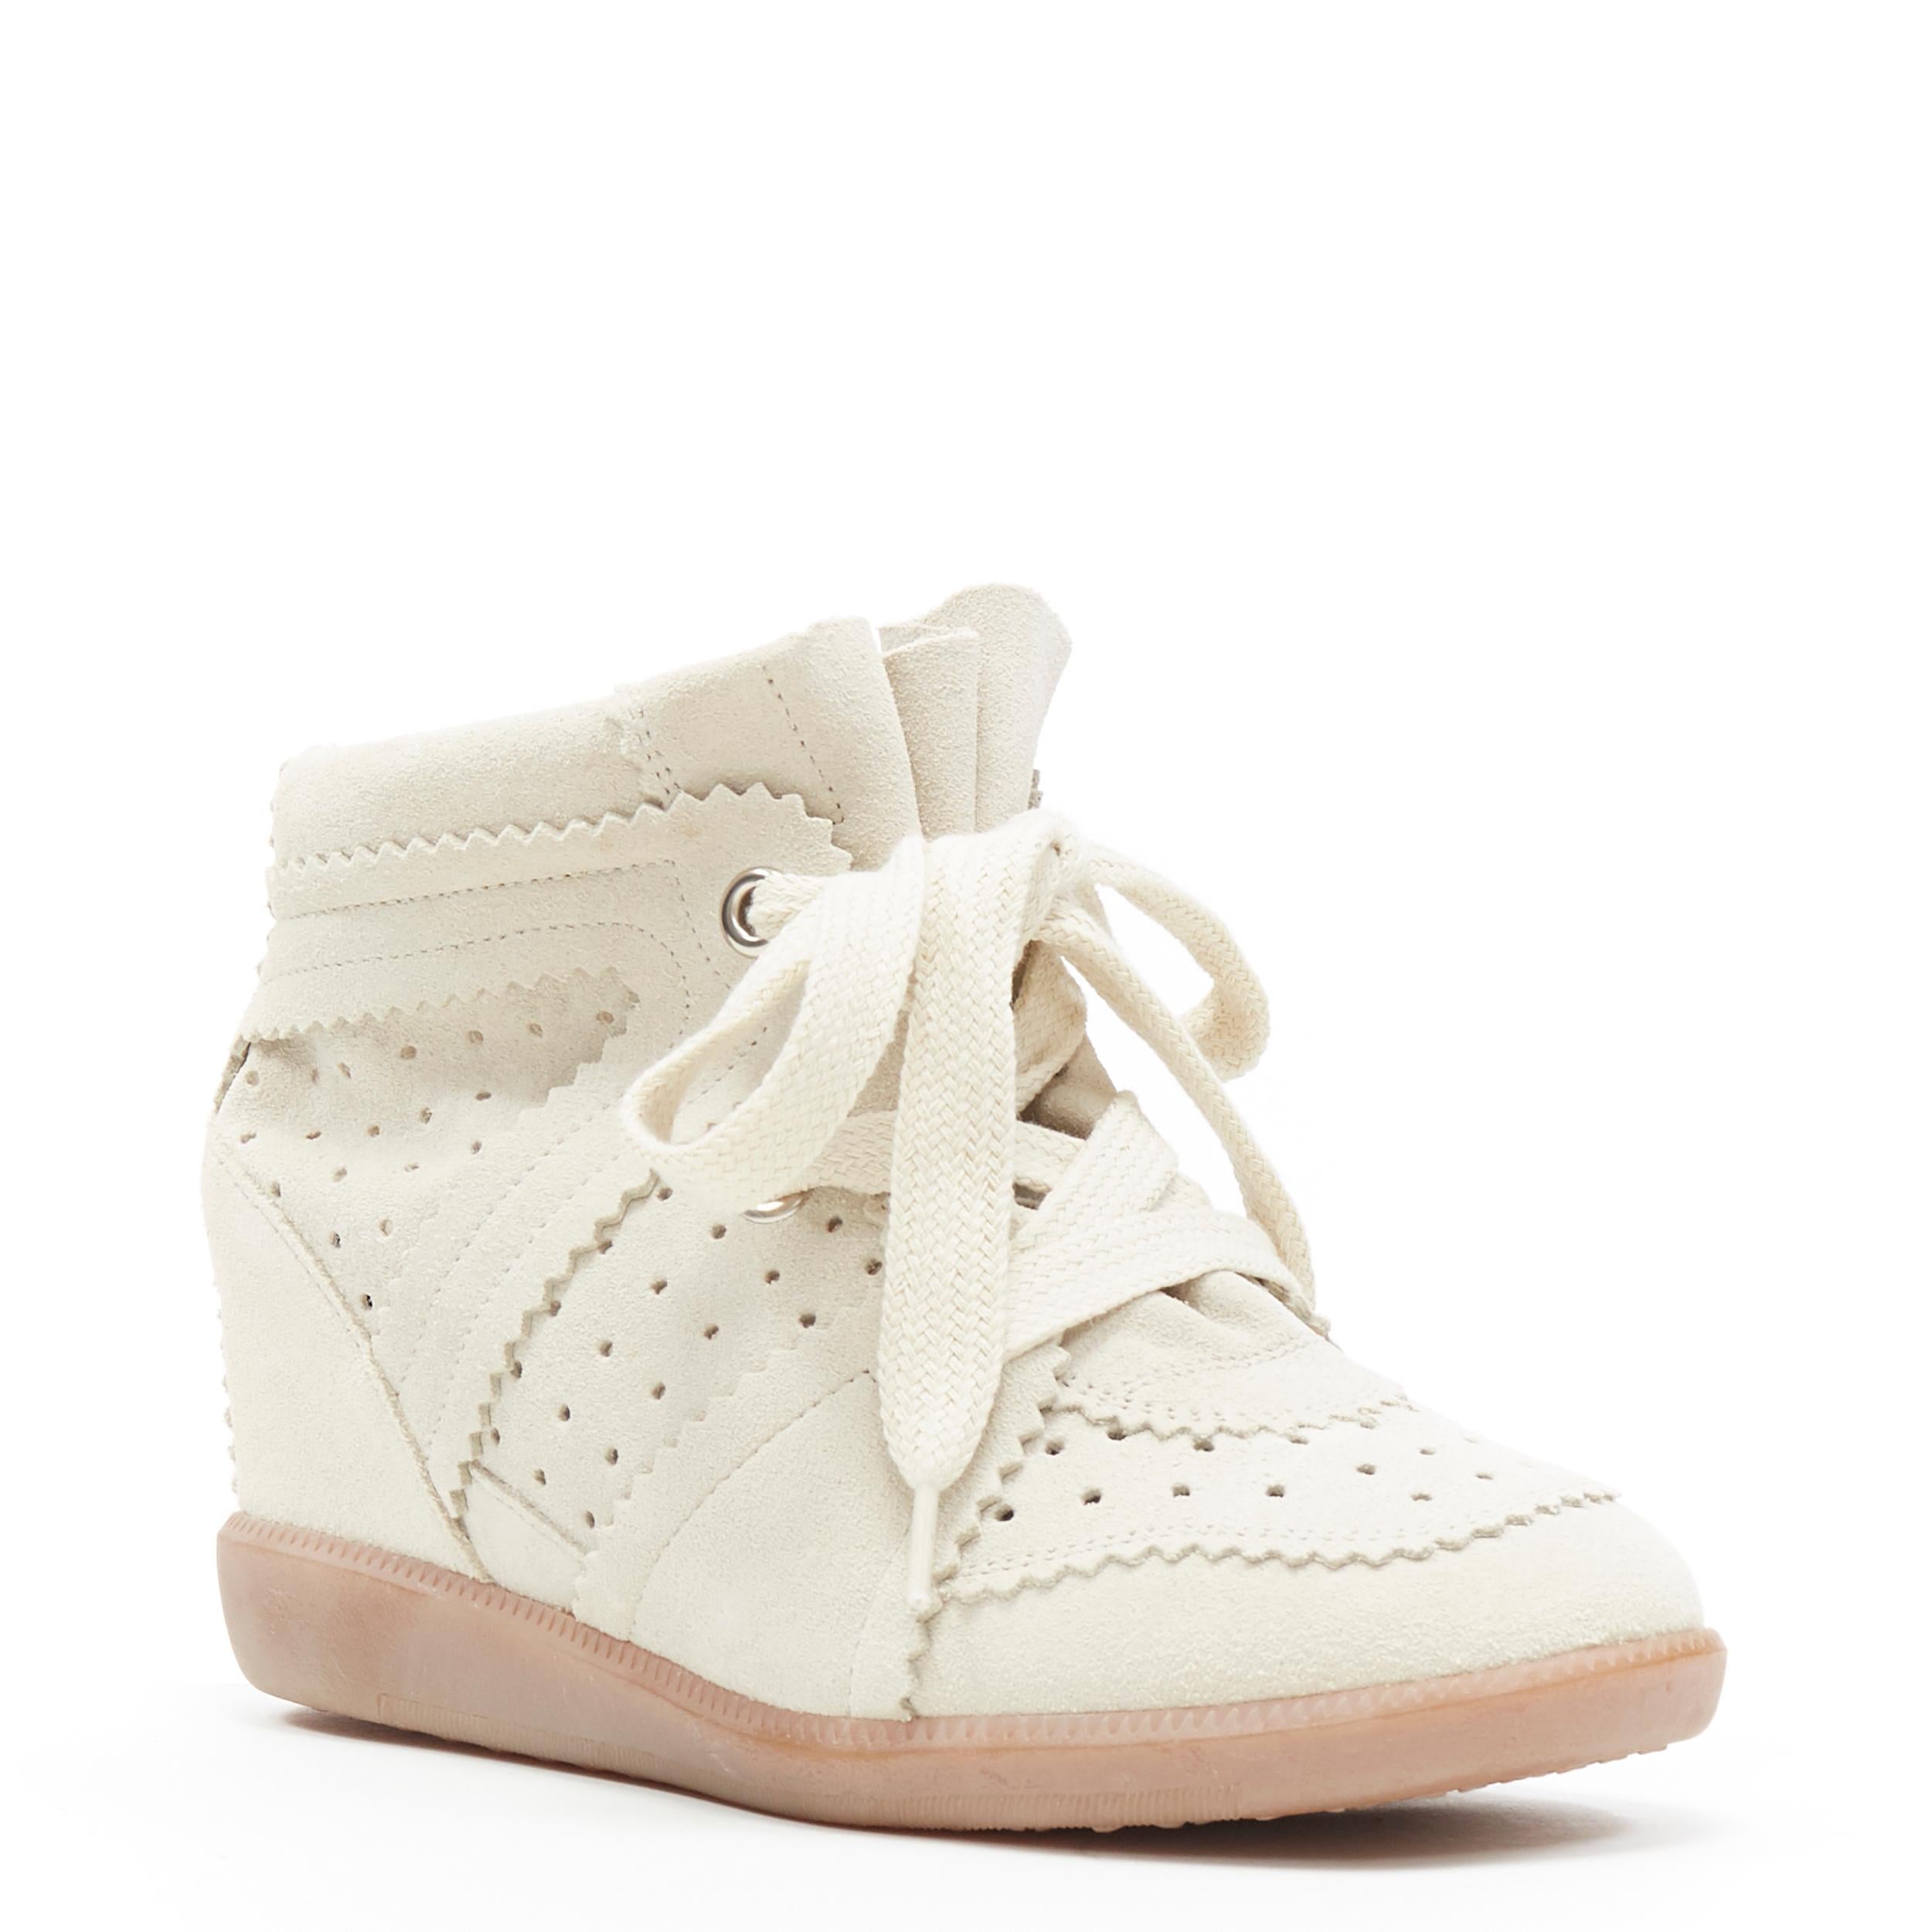 new ISABEL MARANT Bobby Chalk beige suede lace up concealed wedge sneaker EU36
Brand: Isabel Marant Etoile
Designer: Isabel Marant
Model Name / Style: Bobby
Material: Suede
Color: Beige
Pattern: Solid
Closure: Lace up
Lining material: Leather
Extra